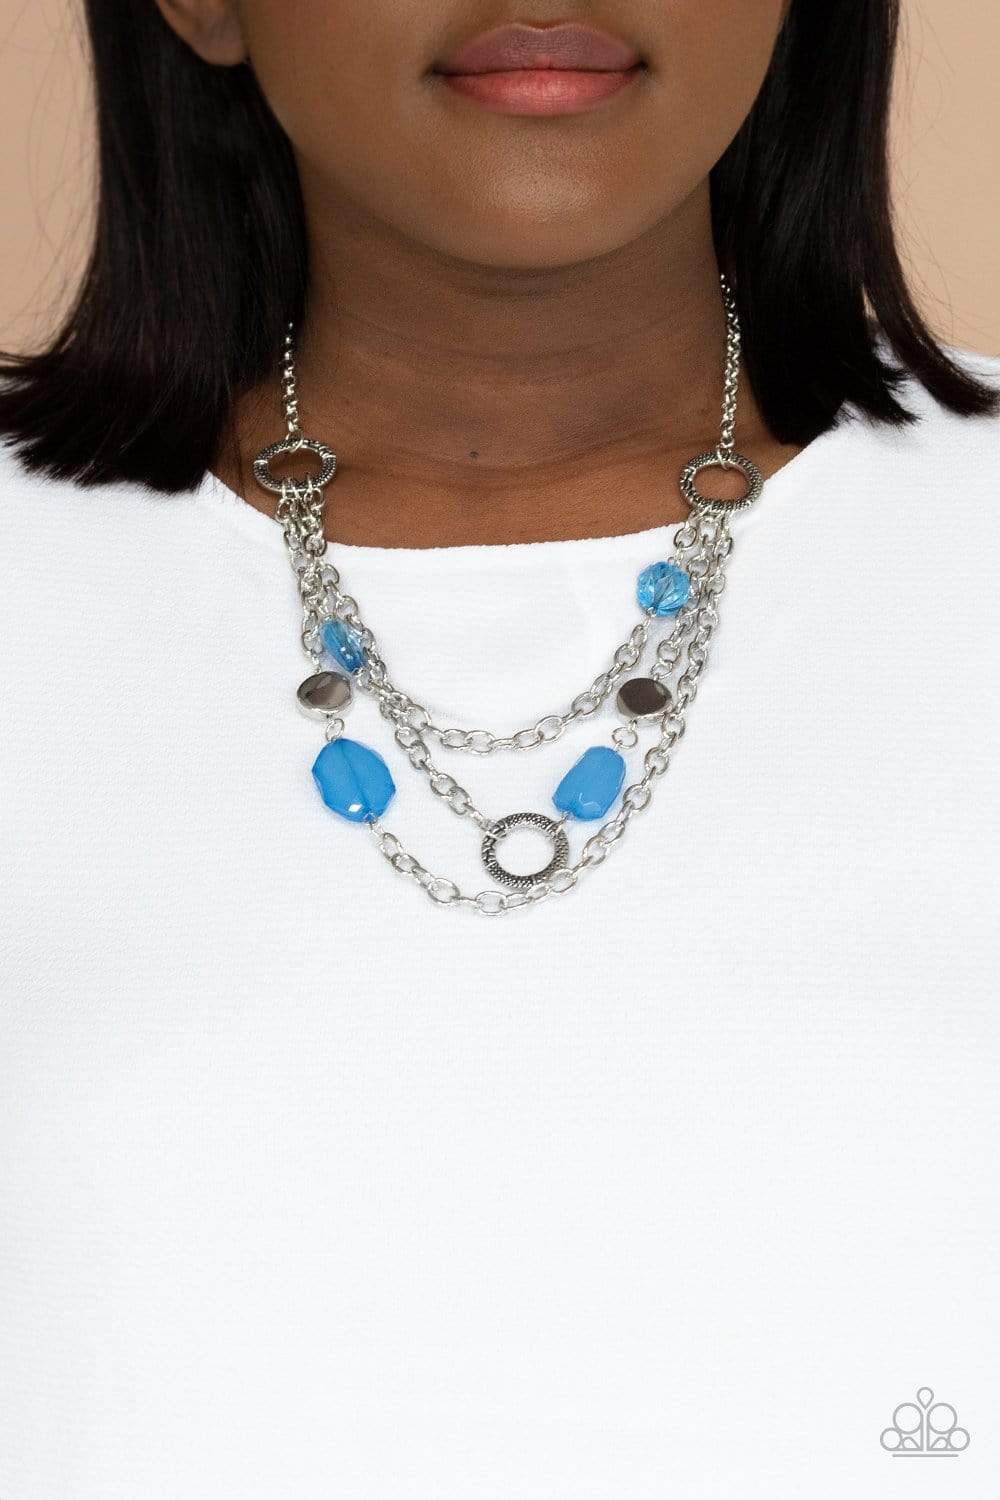 Paparazzi Accessories: Oceanside Spa - Blue Crystal-Like Beads Necklace - Jewels N Thingz Boutique